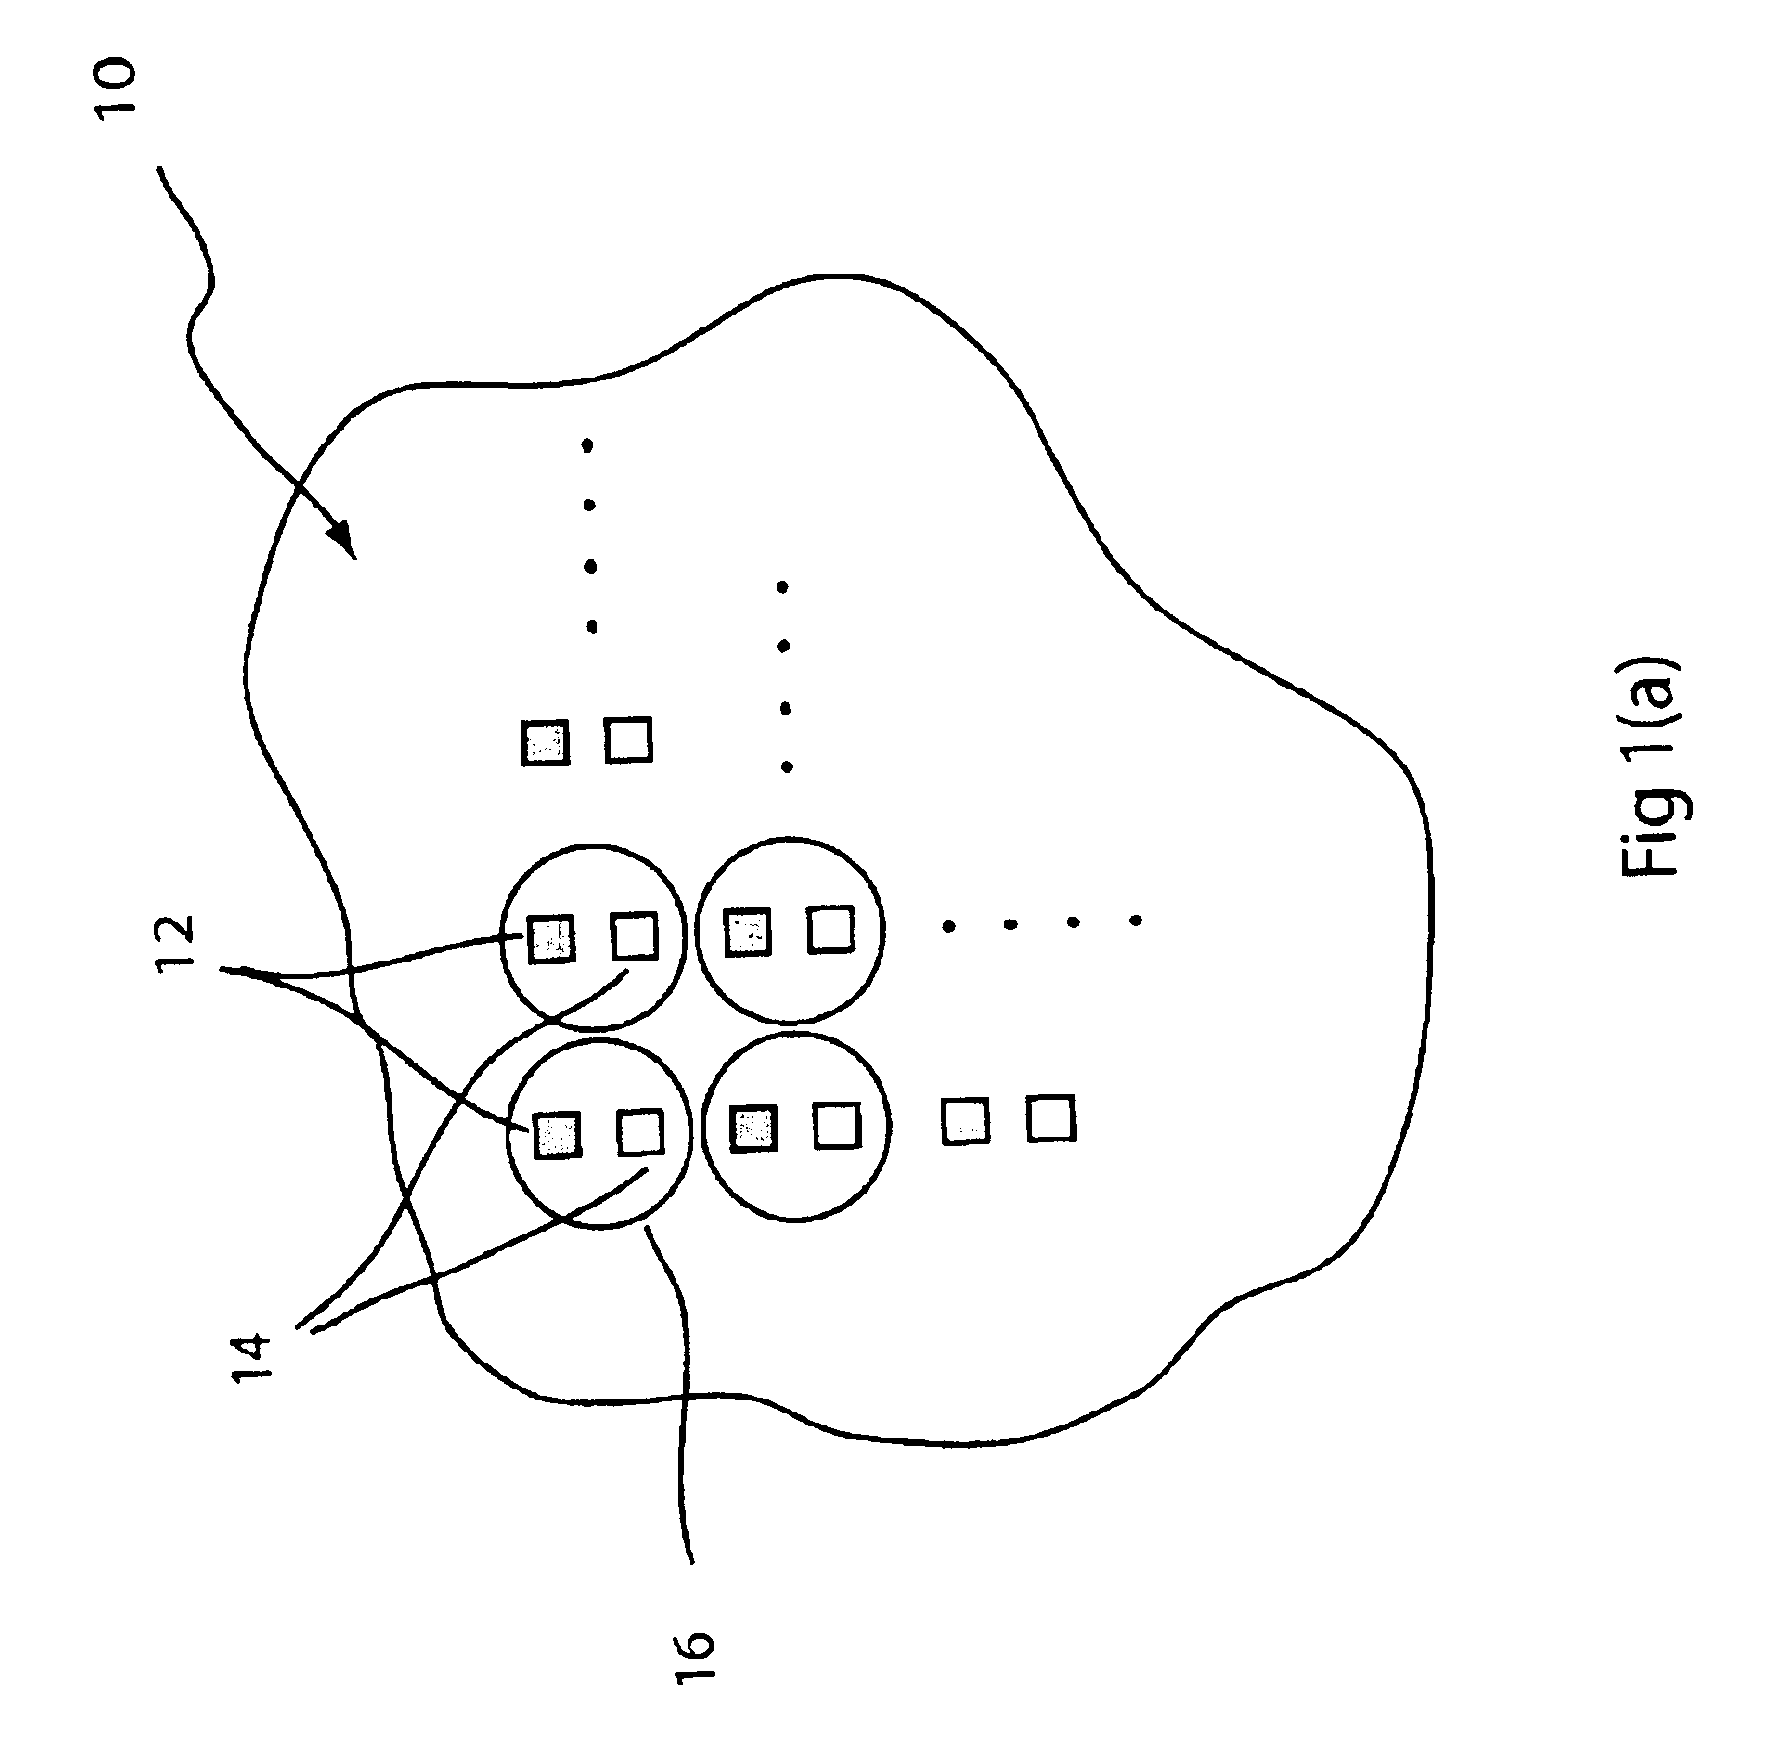 Equalization for a multi-axis imaging system